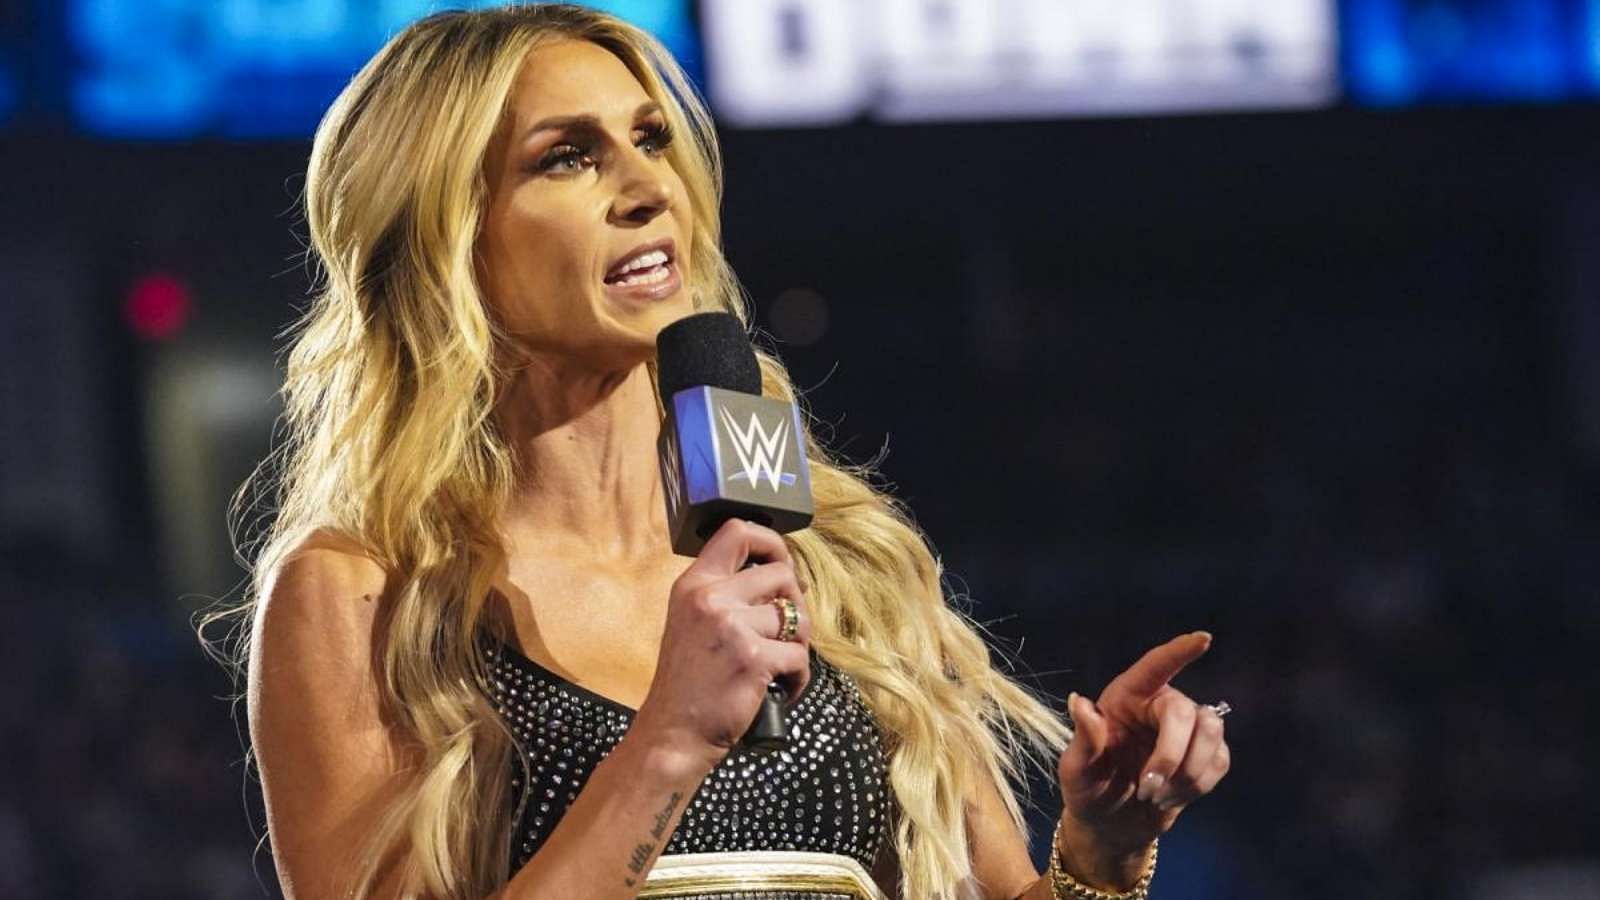 When will Charlotte Flair return to WWE?